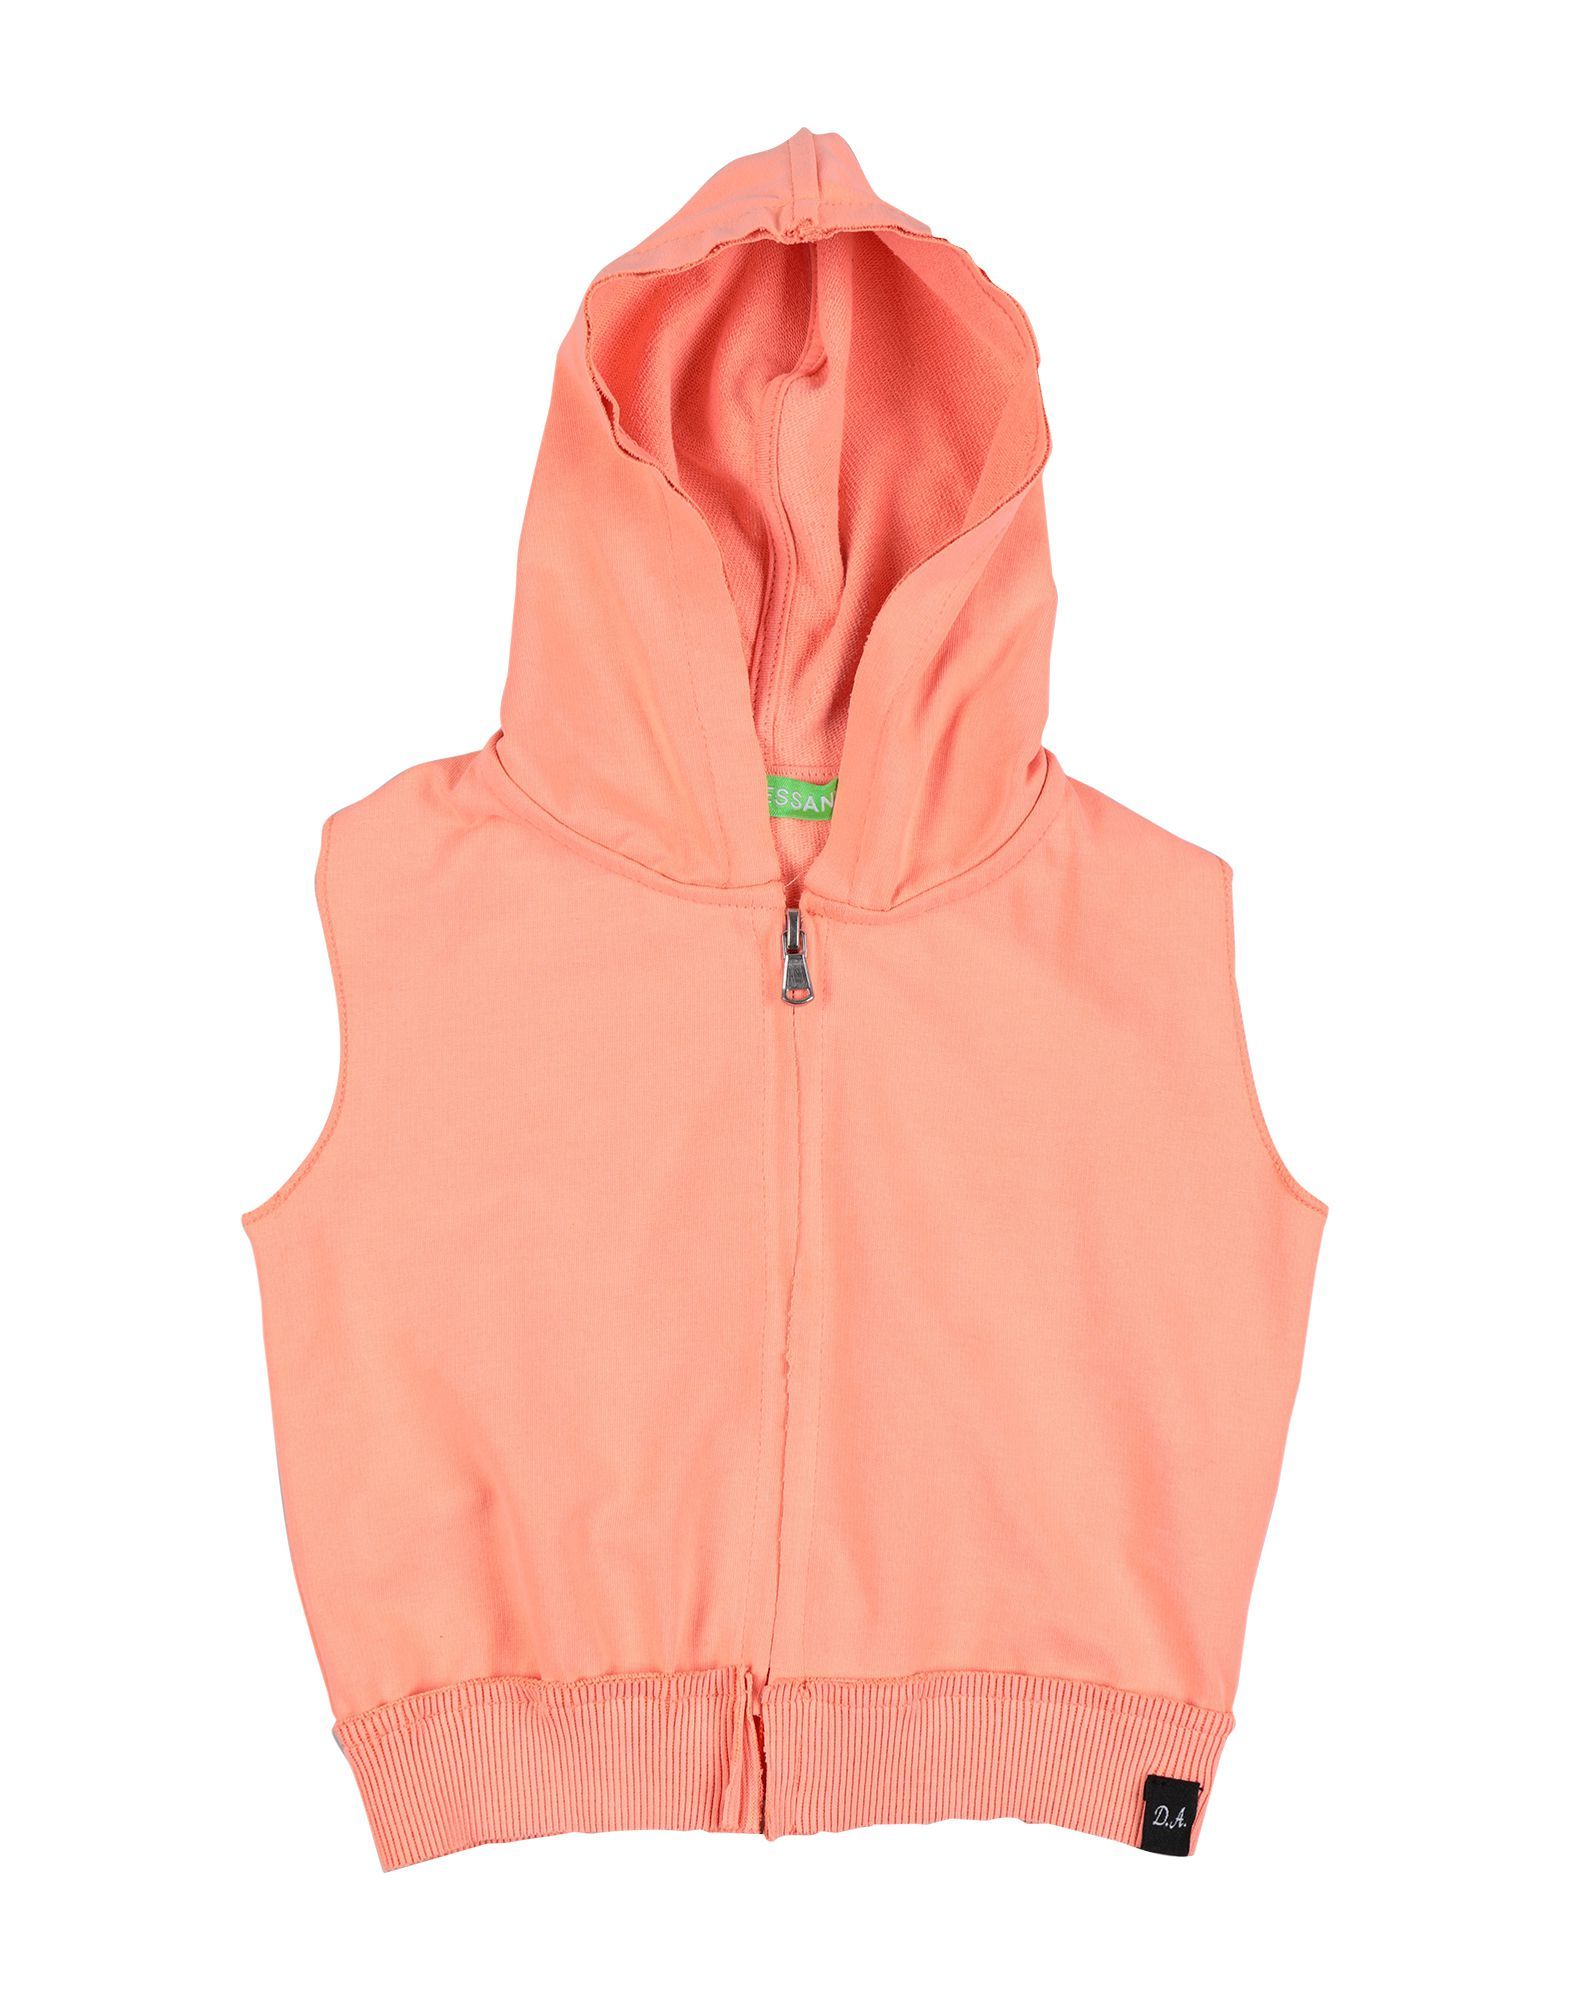 logo, basic solid colour, hooded collar, sleeveless, front closure, zip, no pockets, french terry lining, wash at 30° c, do not dry clean, iron at 110° c max, do not bleach, do not tumble dry, stretch, small sized